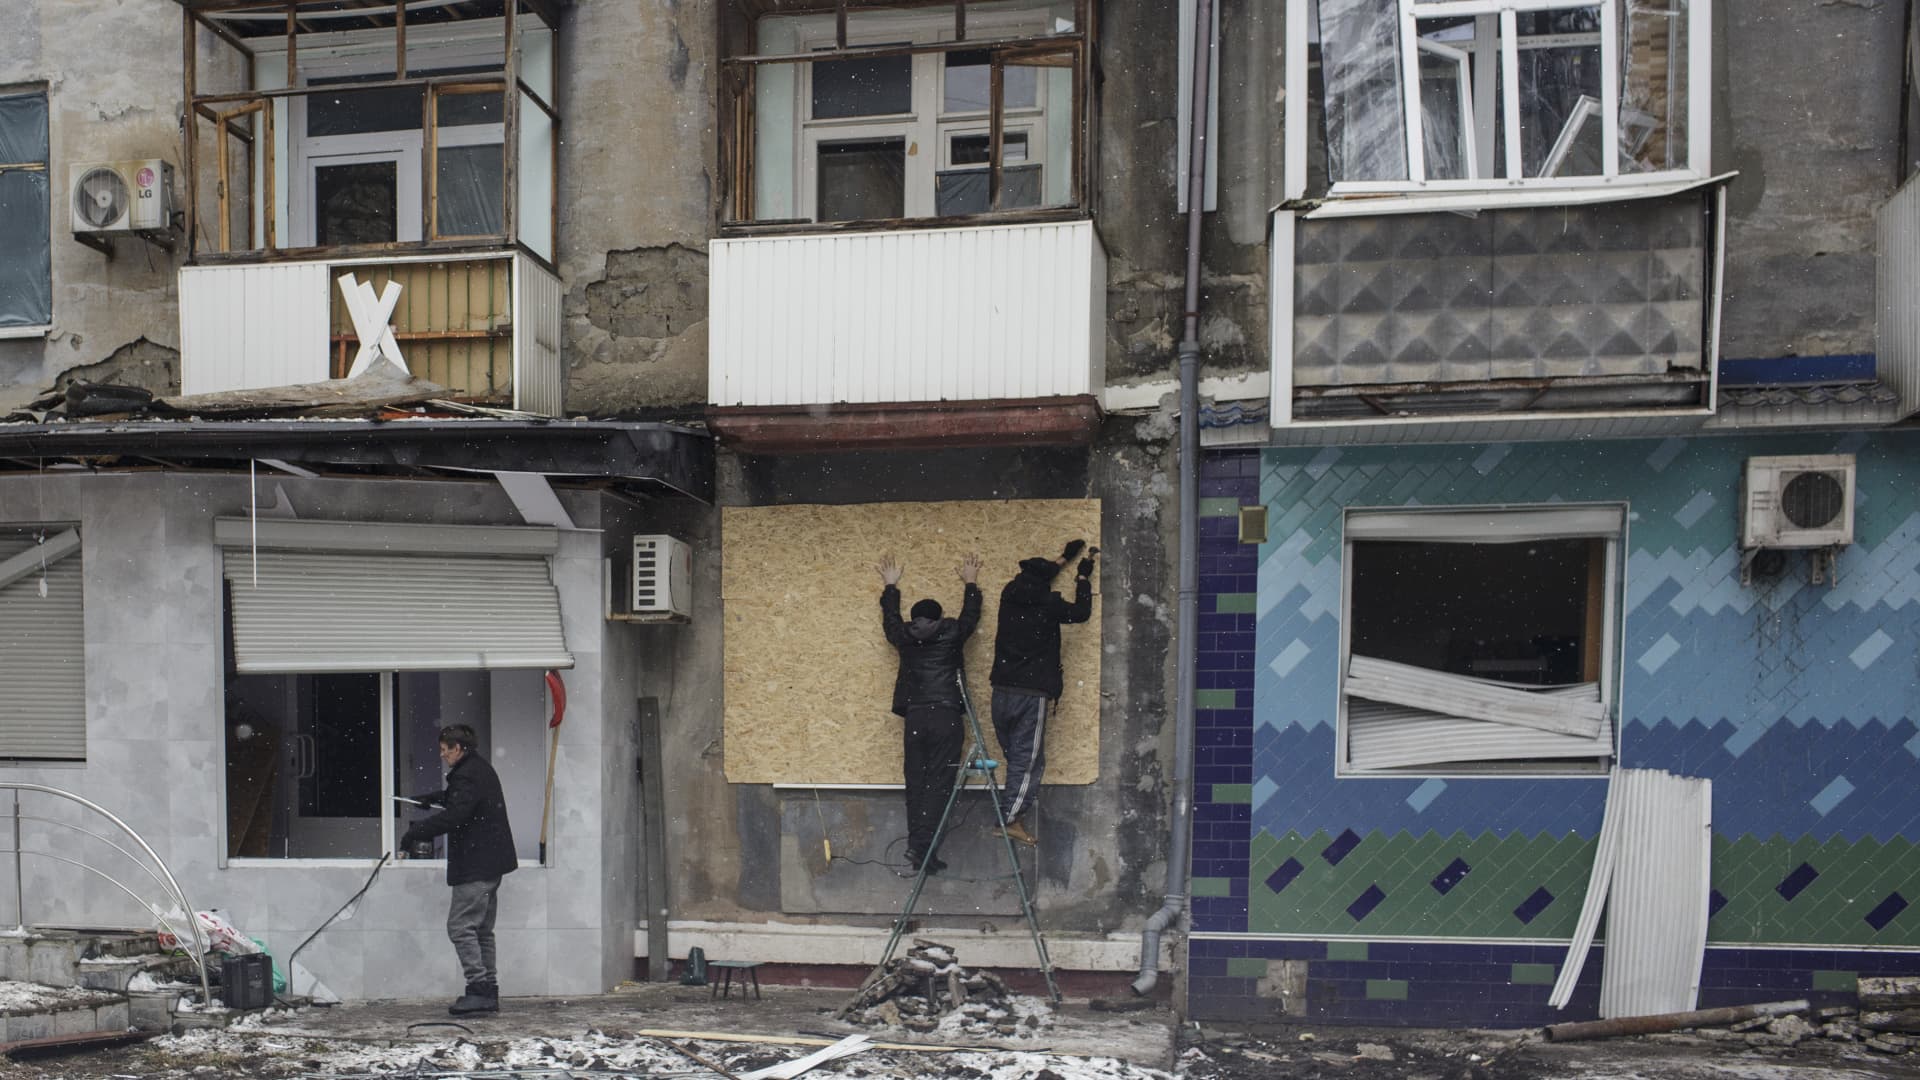 Citizens carry piece of wood which will use to repair their house damaged in the attack after a Russian missile strike in Kramatorsk, Donetsk Oblast, Ukraine on February 02, 2023. 